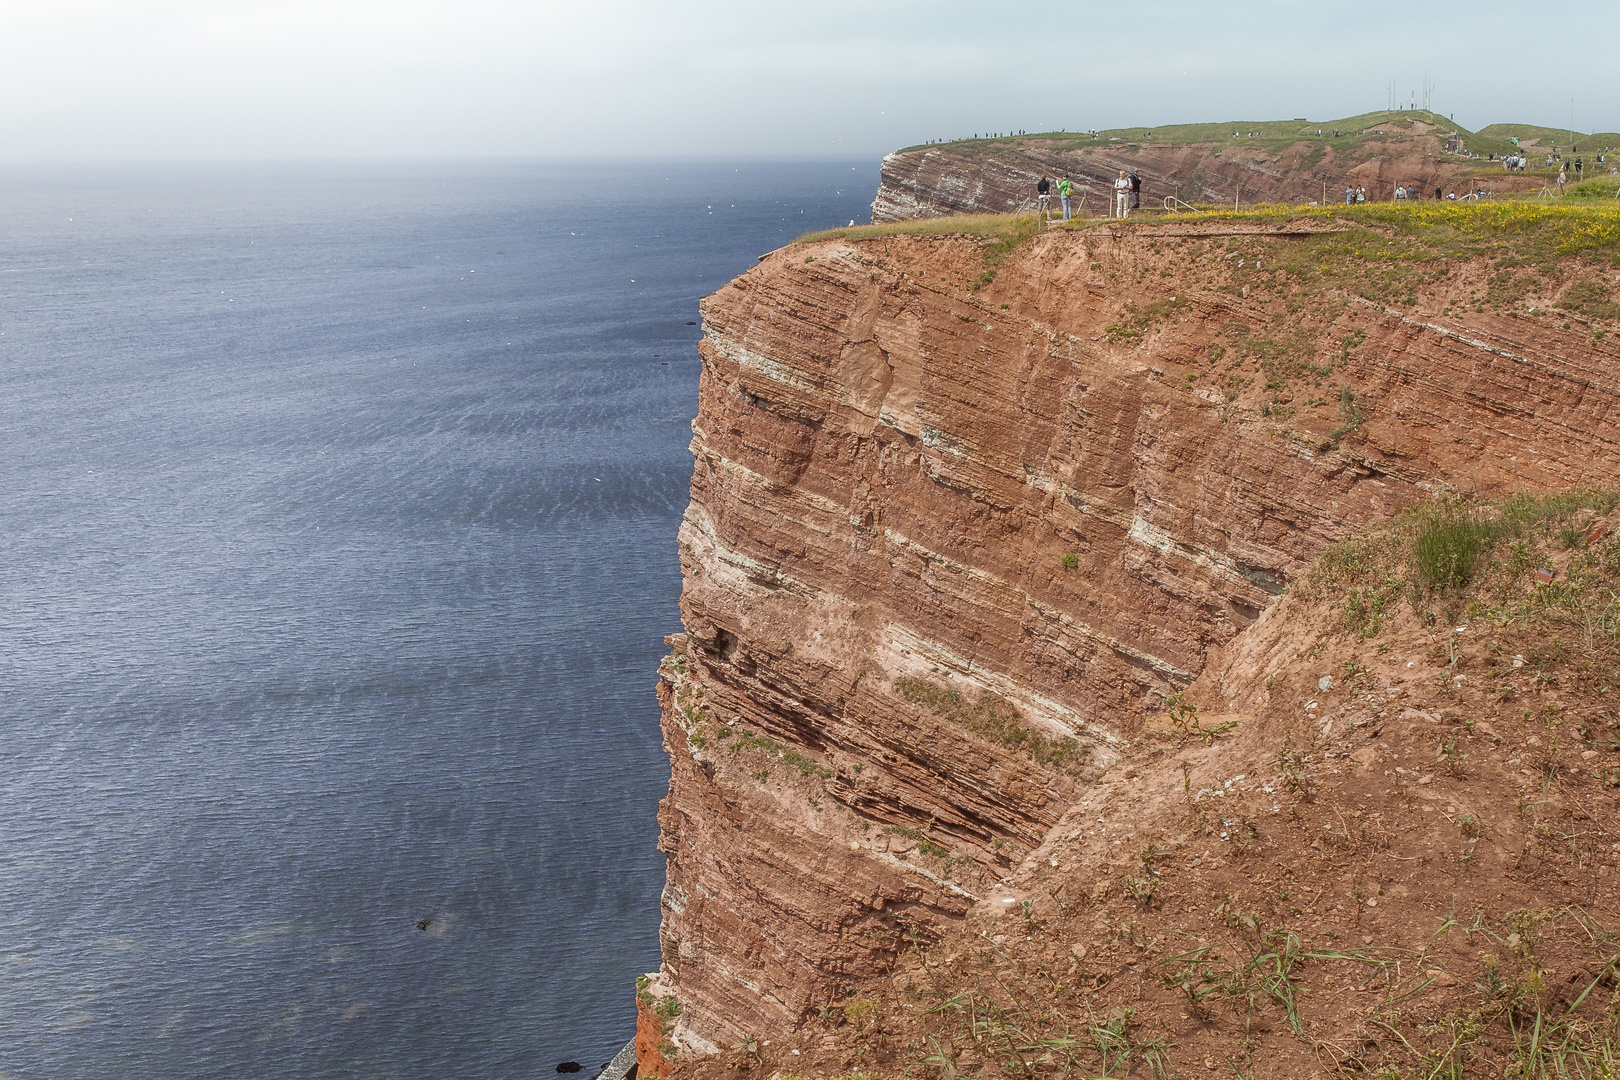 The helgoland rock